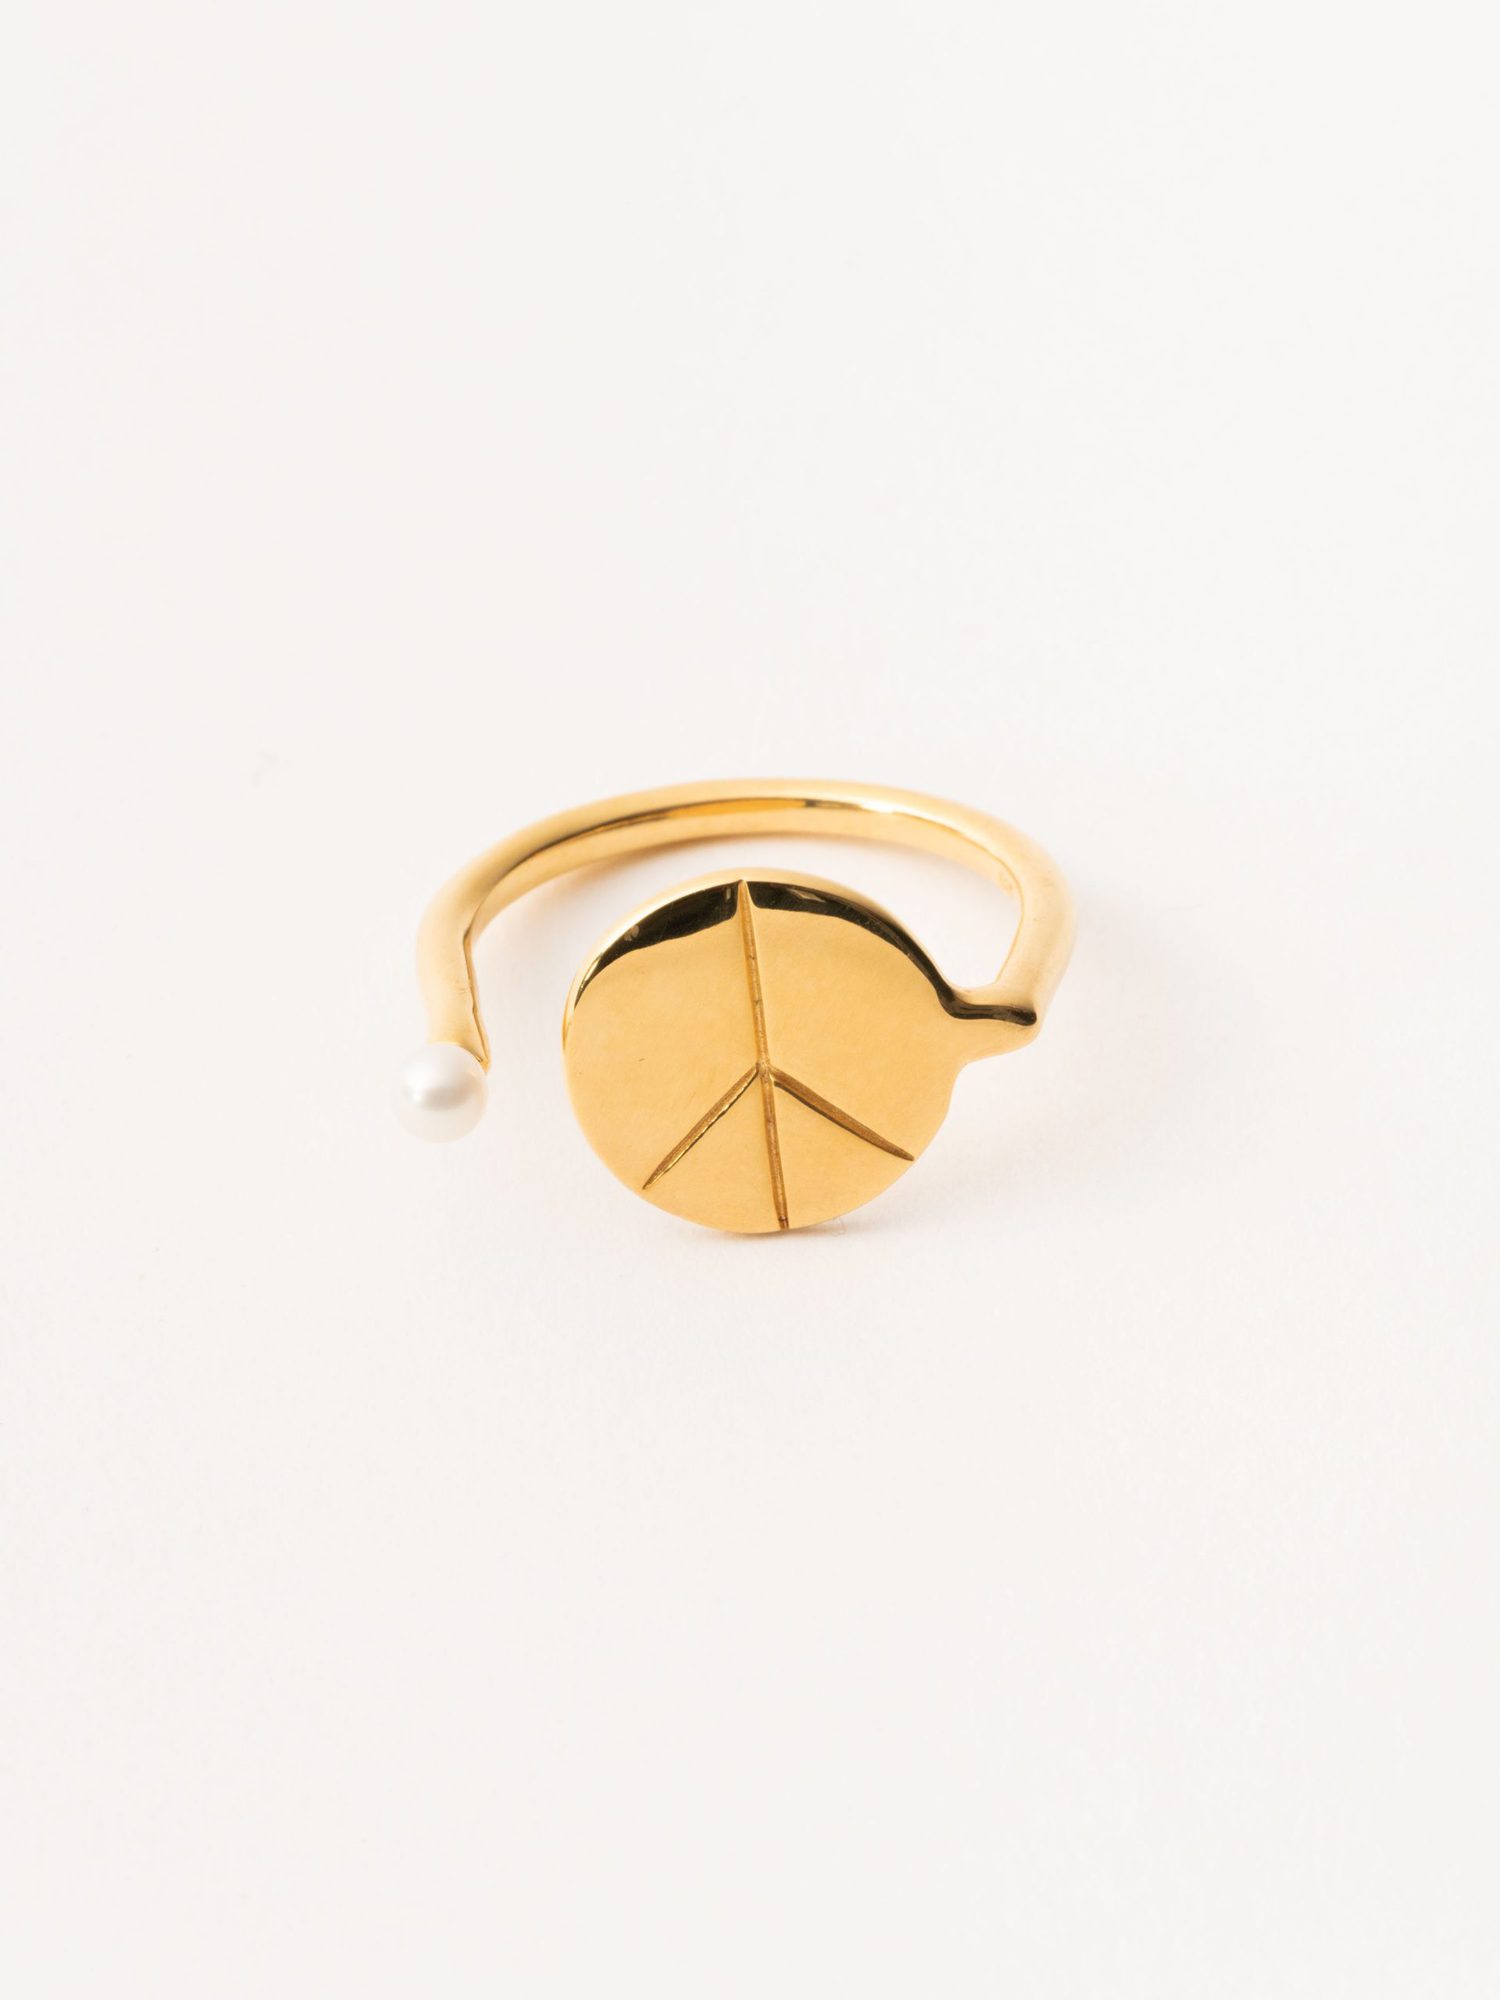 Gold Peace/ CND Open Ring